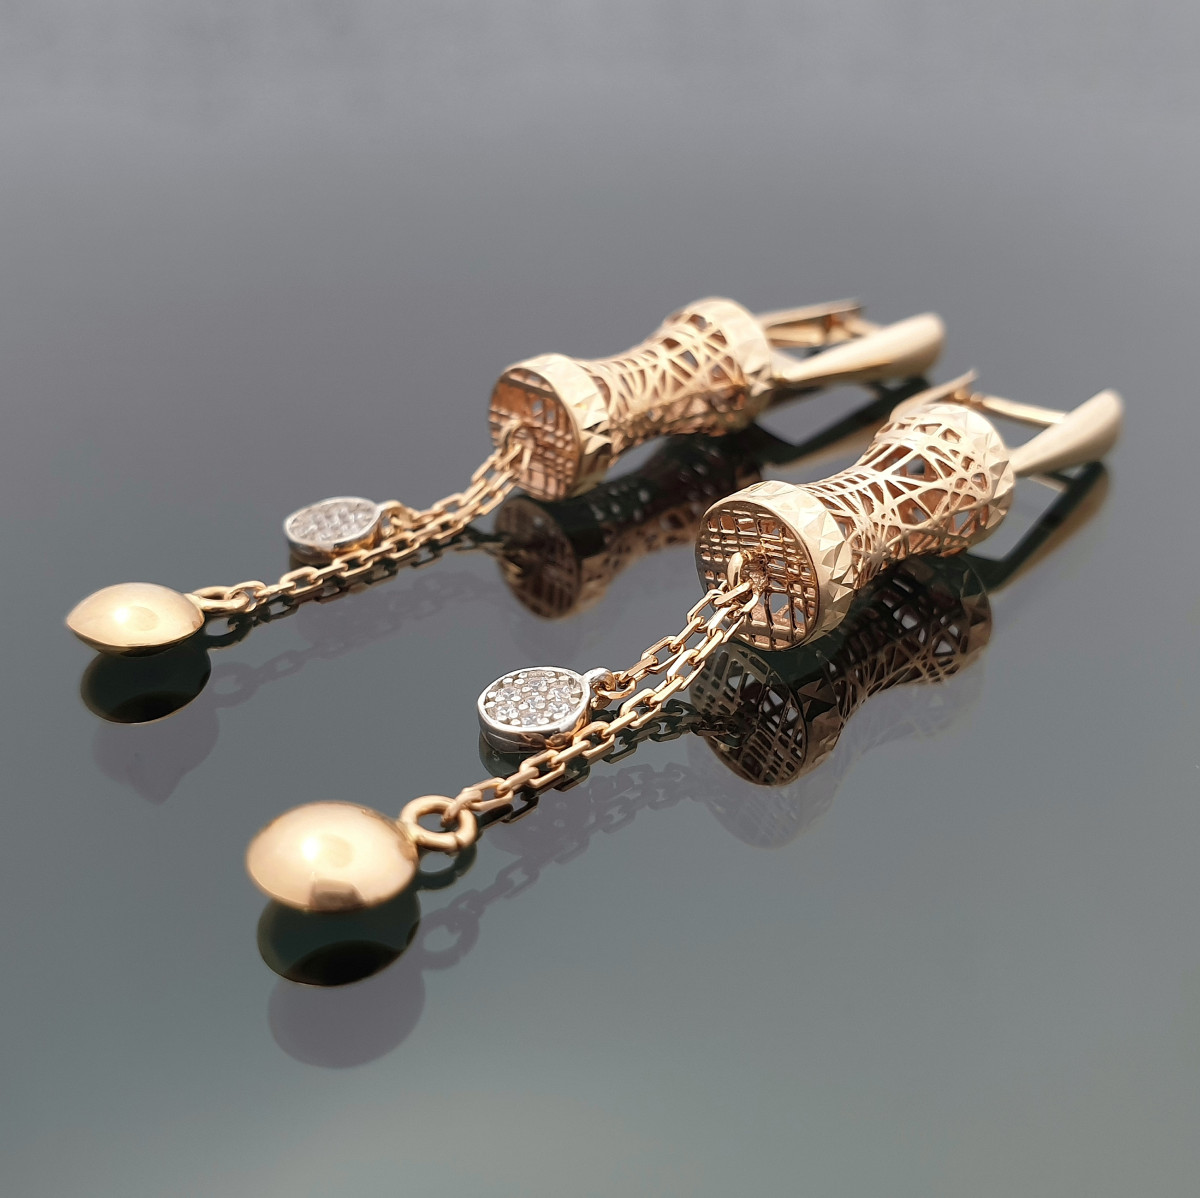  Long earrings decorated with zircons (198)